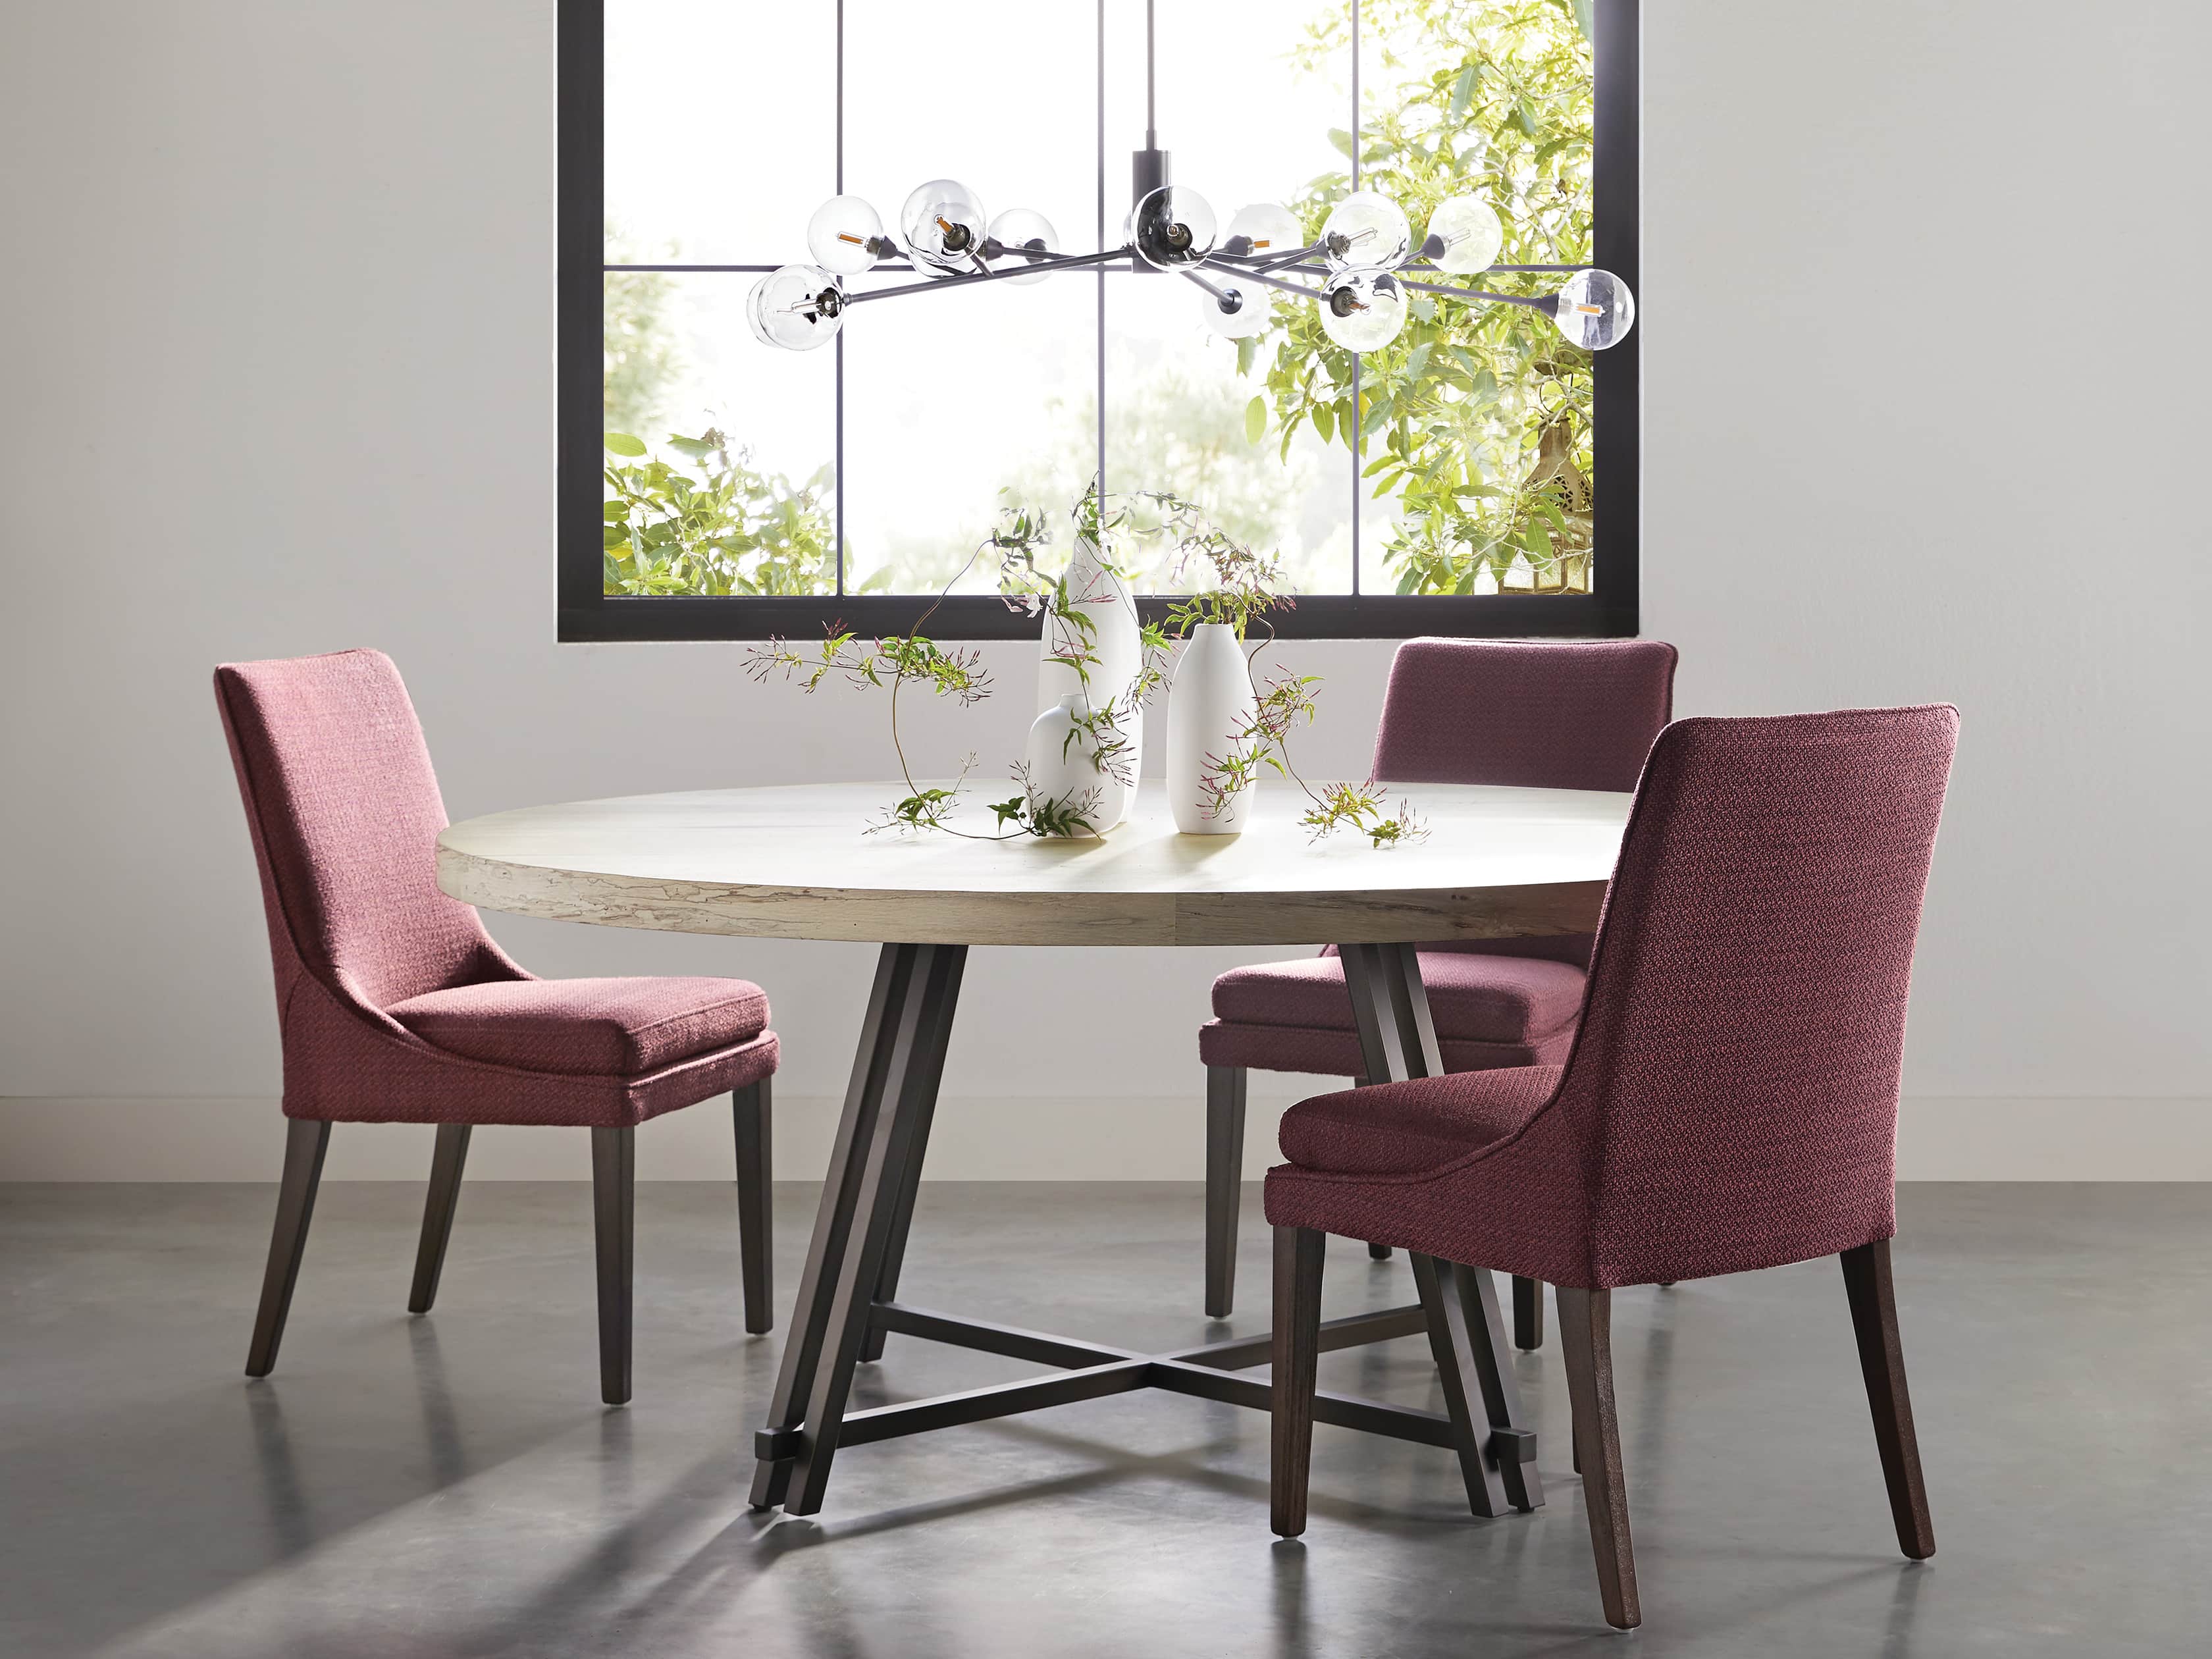 Nika Round Dining Table Arhaus, What Sizes Do Round Dining Tables Come In